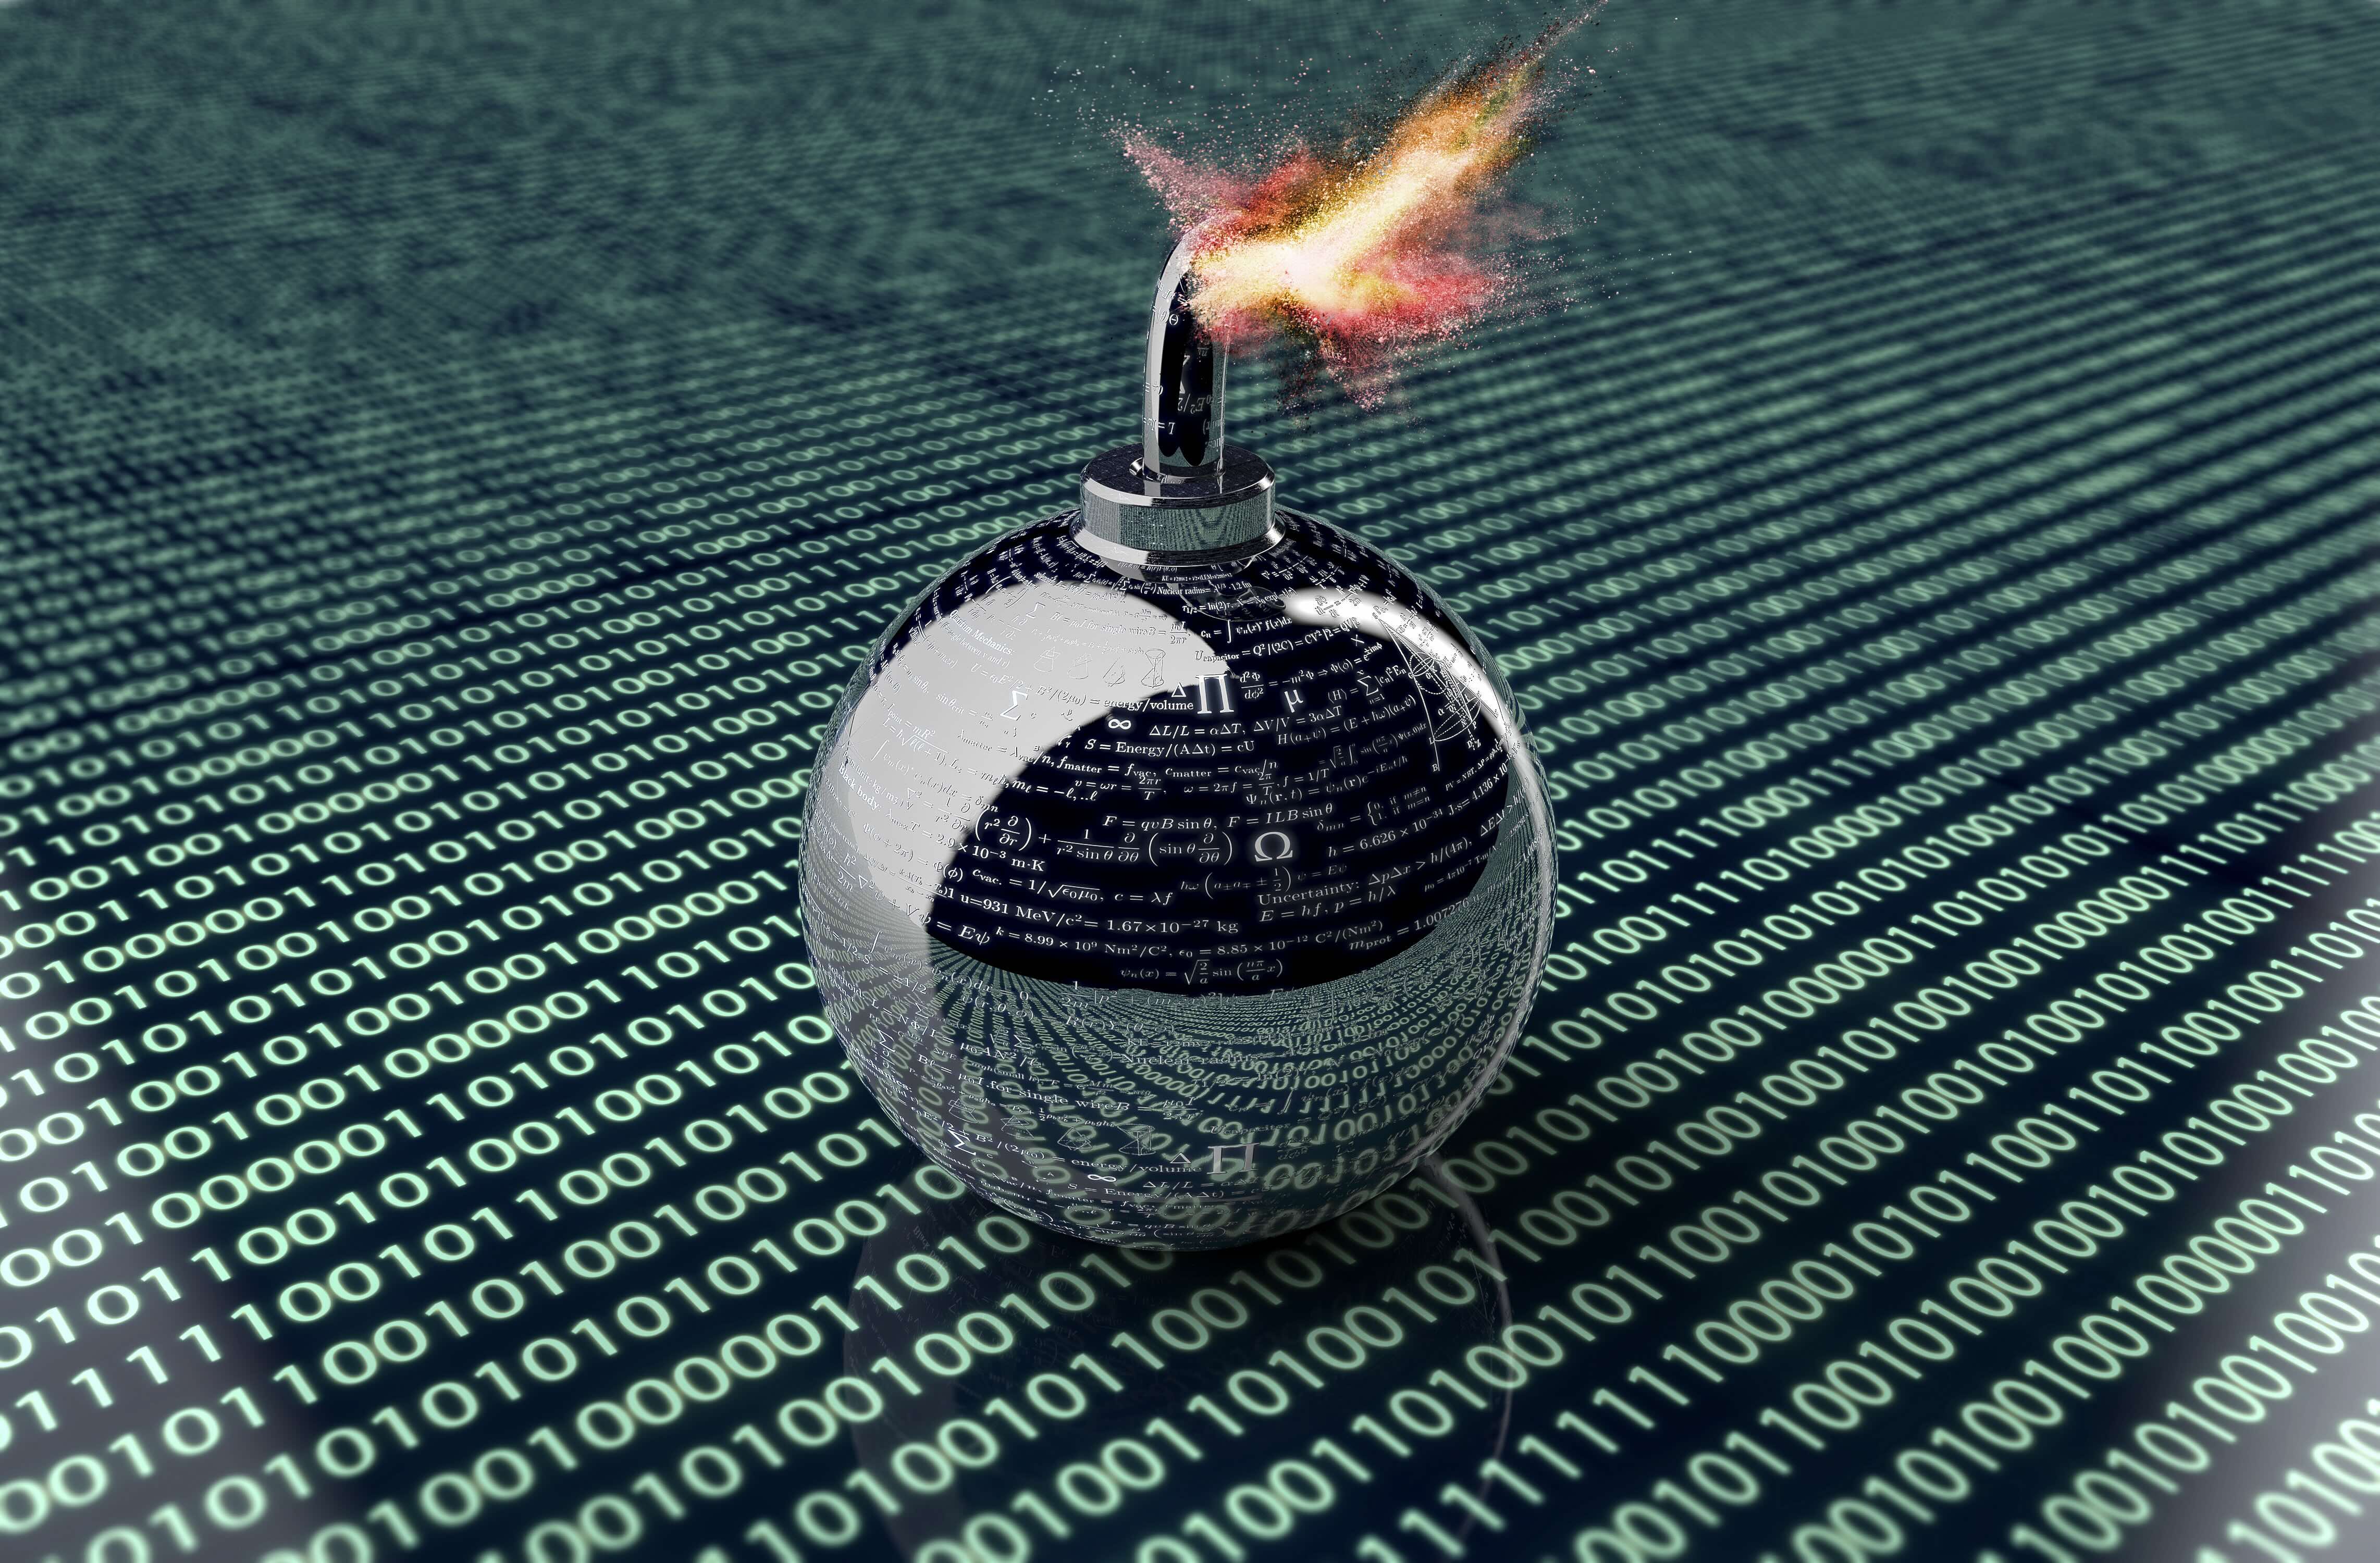 An image of a lit explosive device on top of lines of code